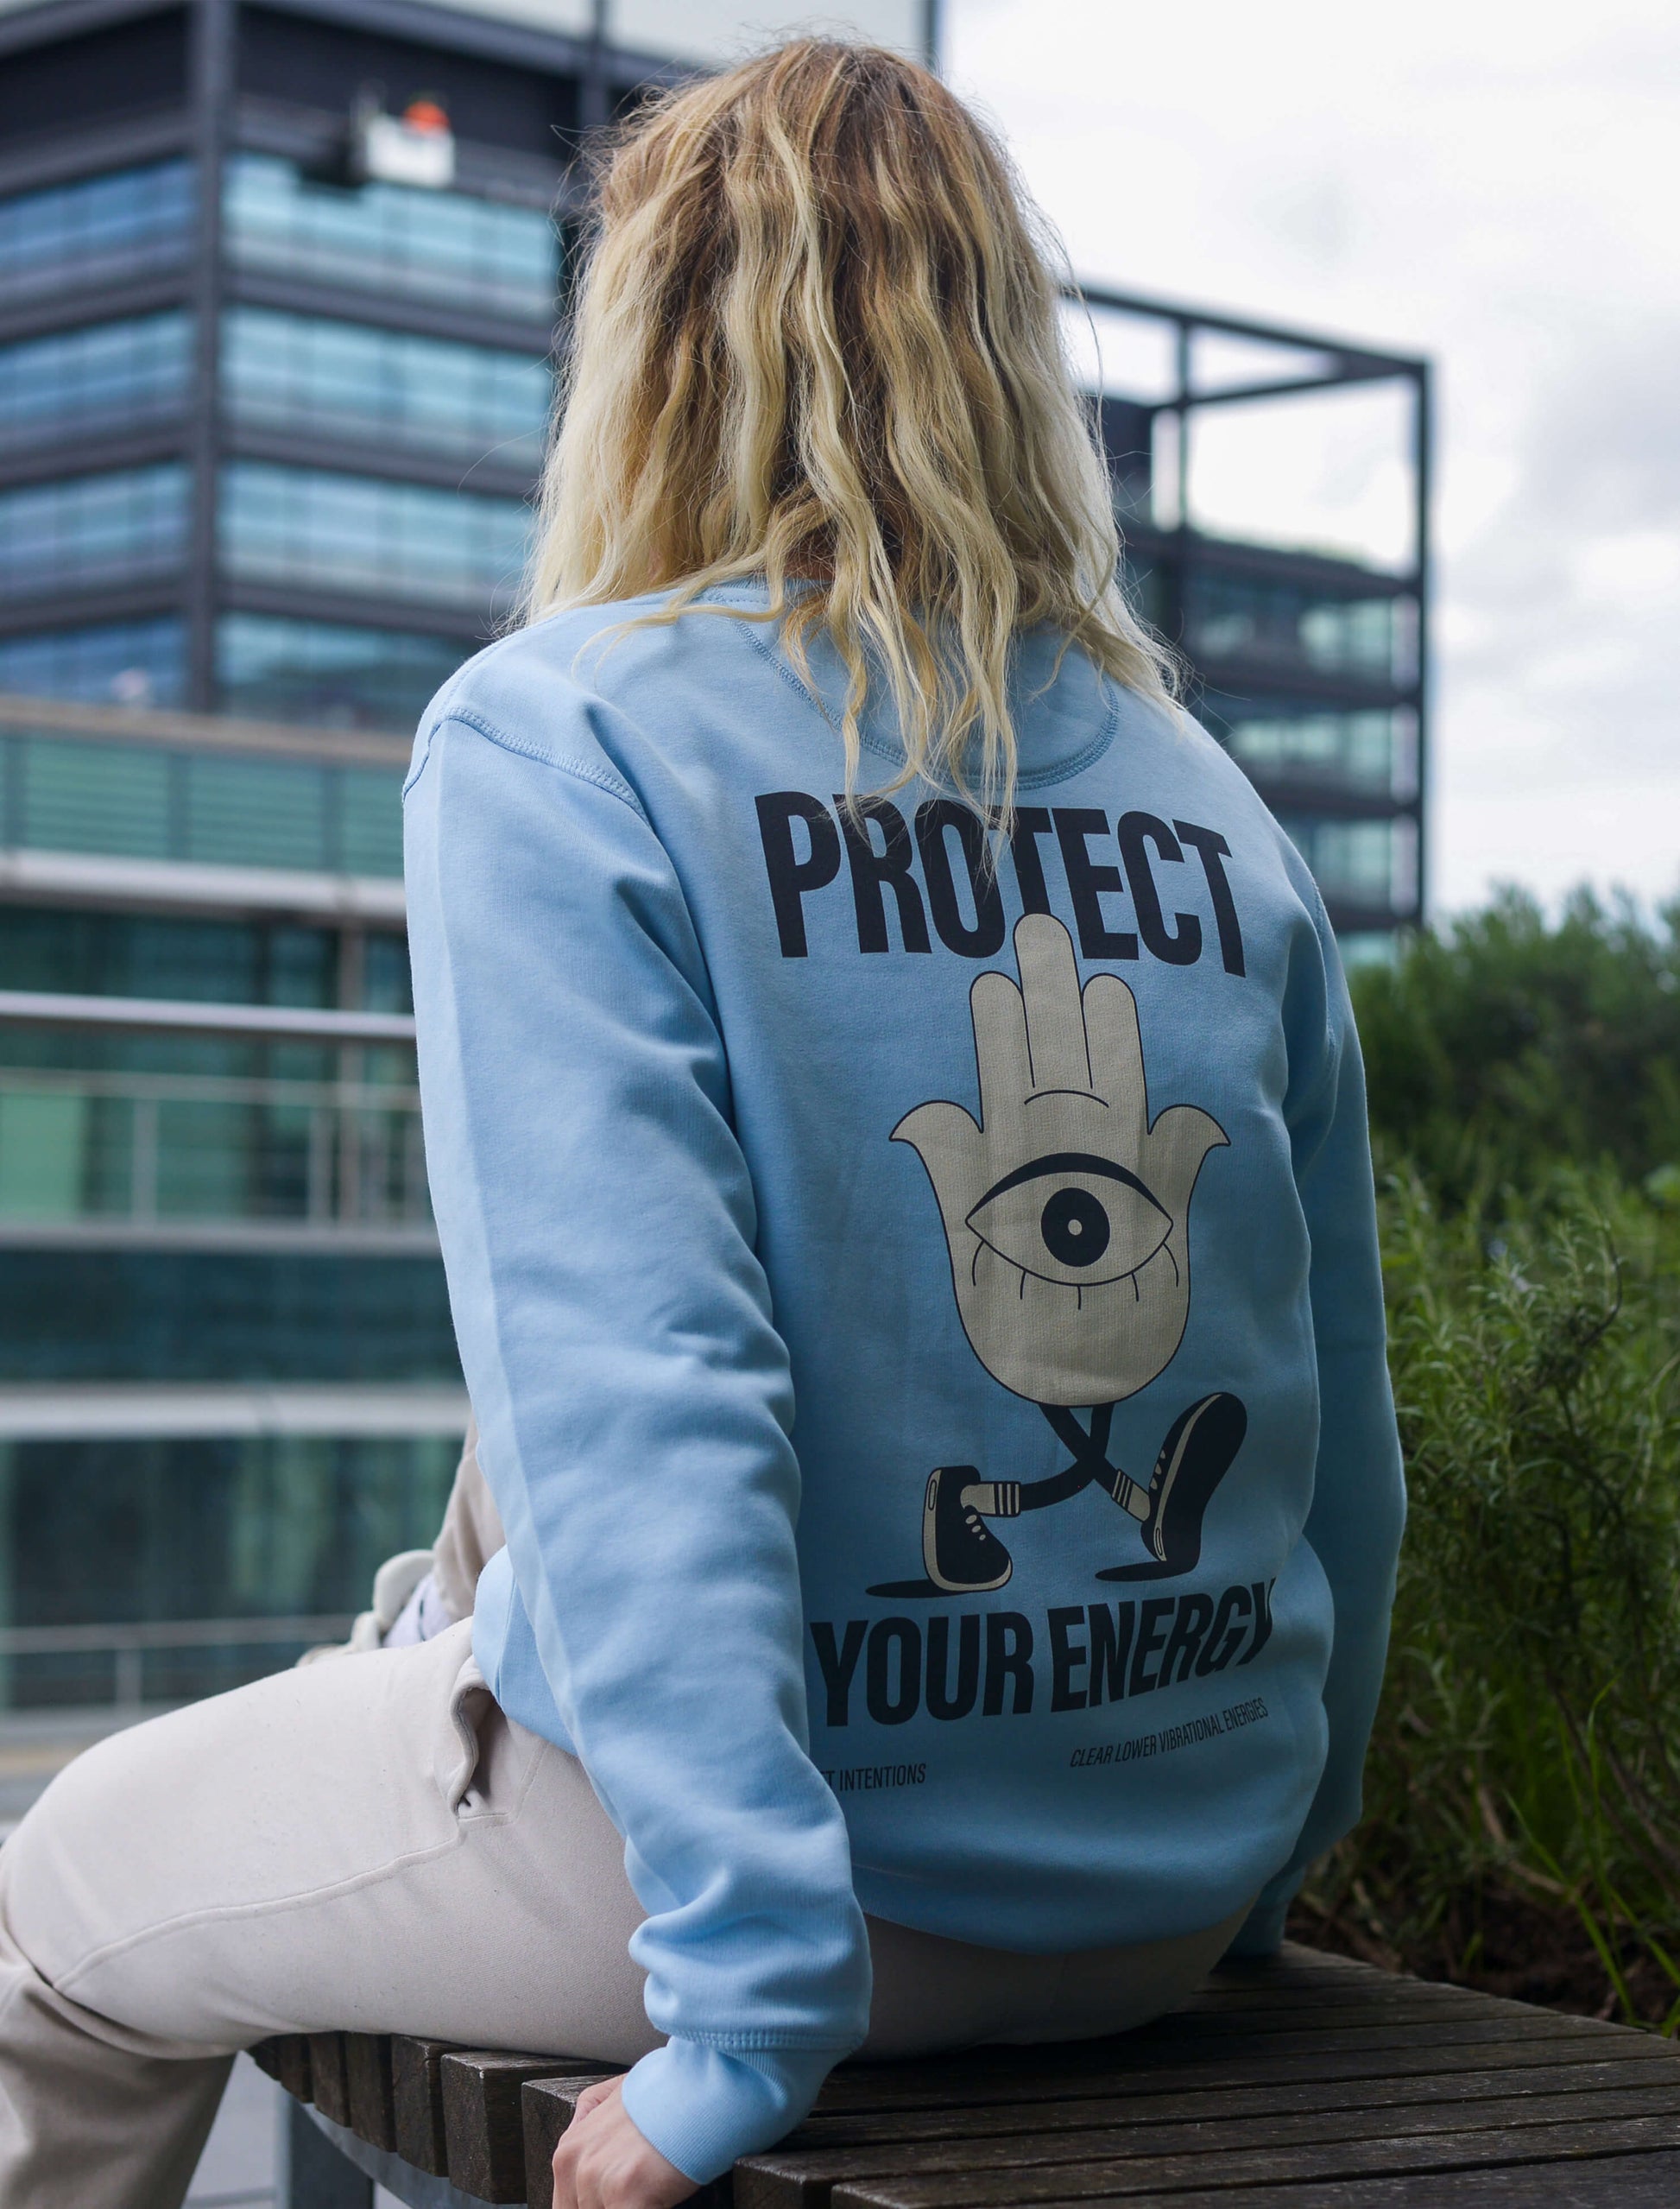 Protect your energy hamsa hand sweater in baby blue. Blonde model wearing positive streetwear